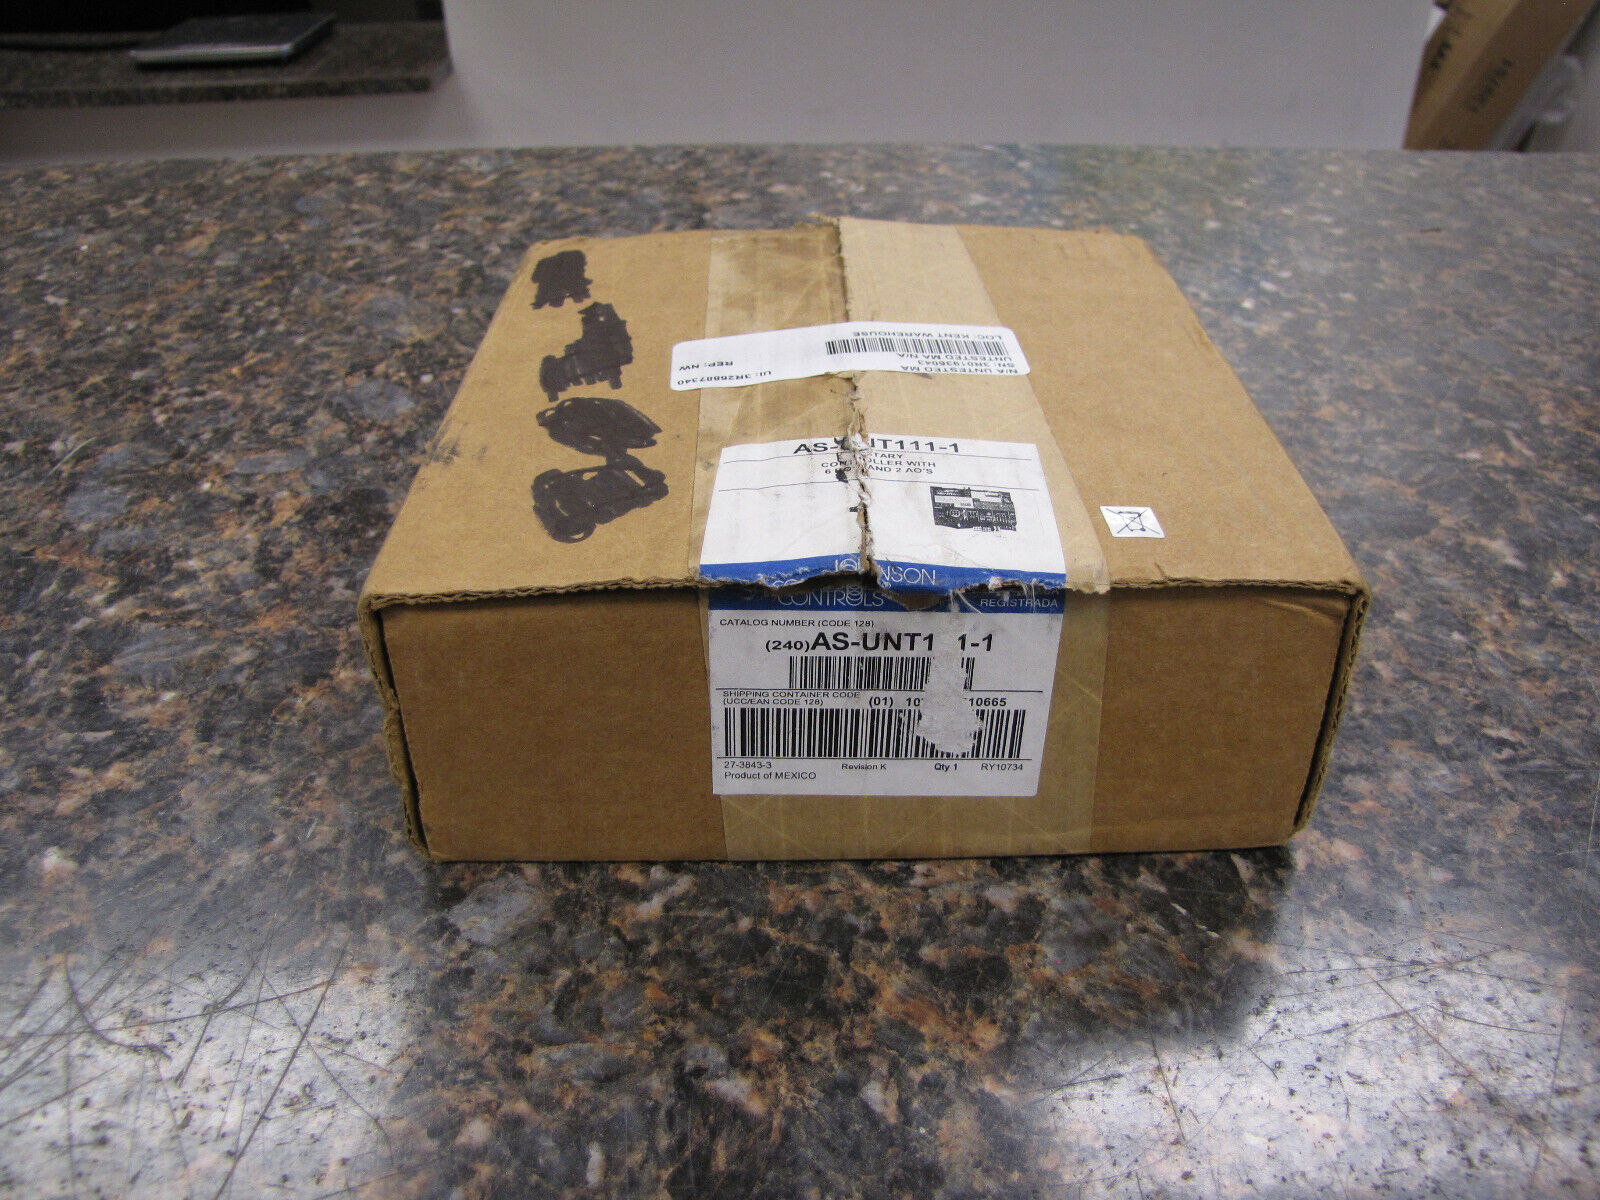 NEW in box MetaSys Johnson Controls AS-UNT111-1 Unitary Controller